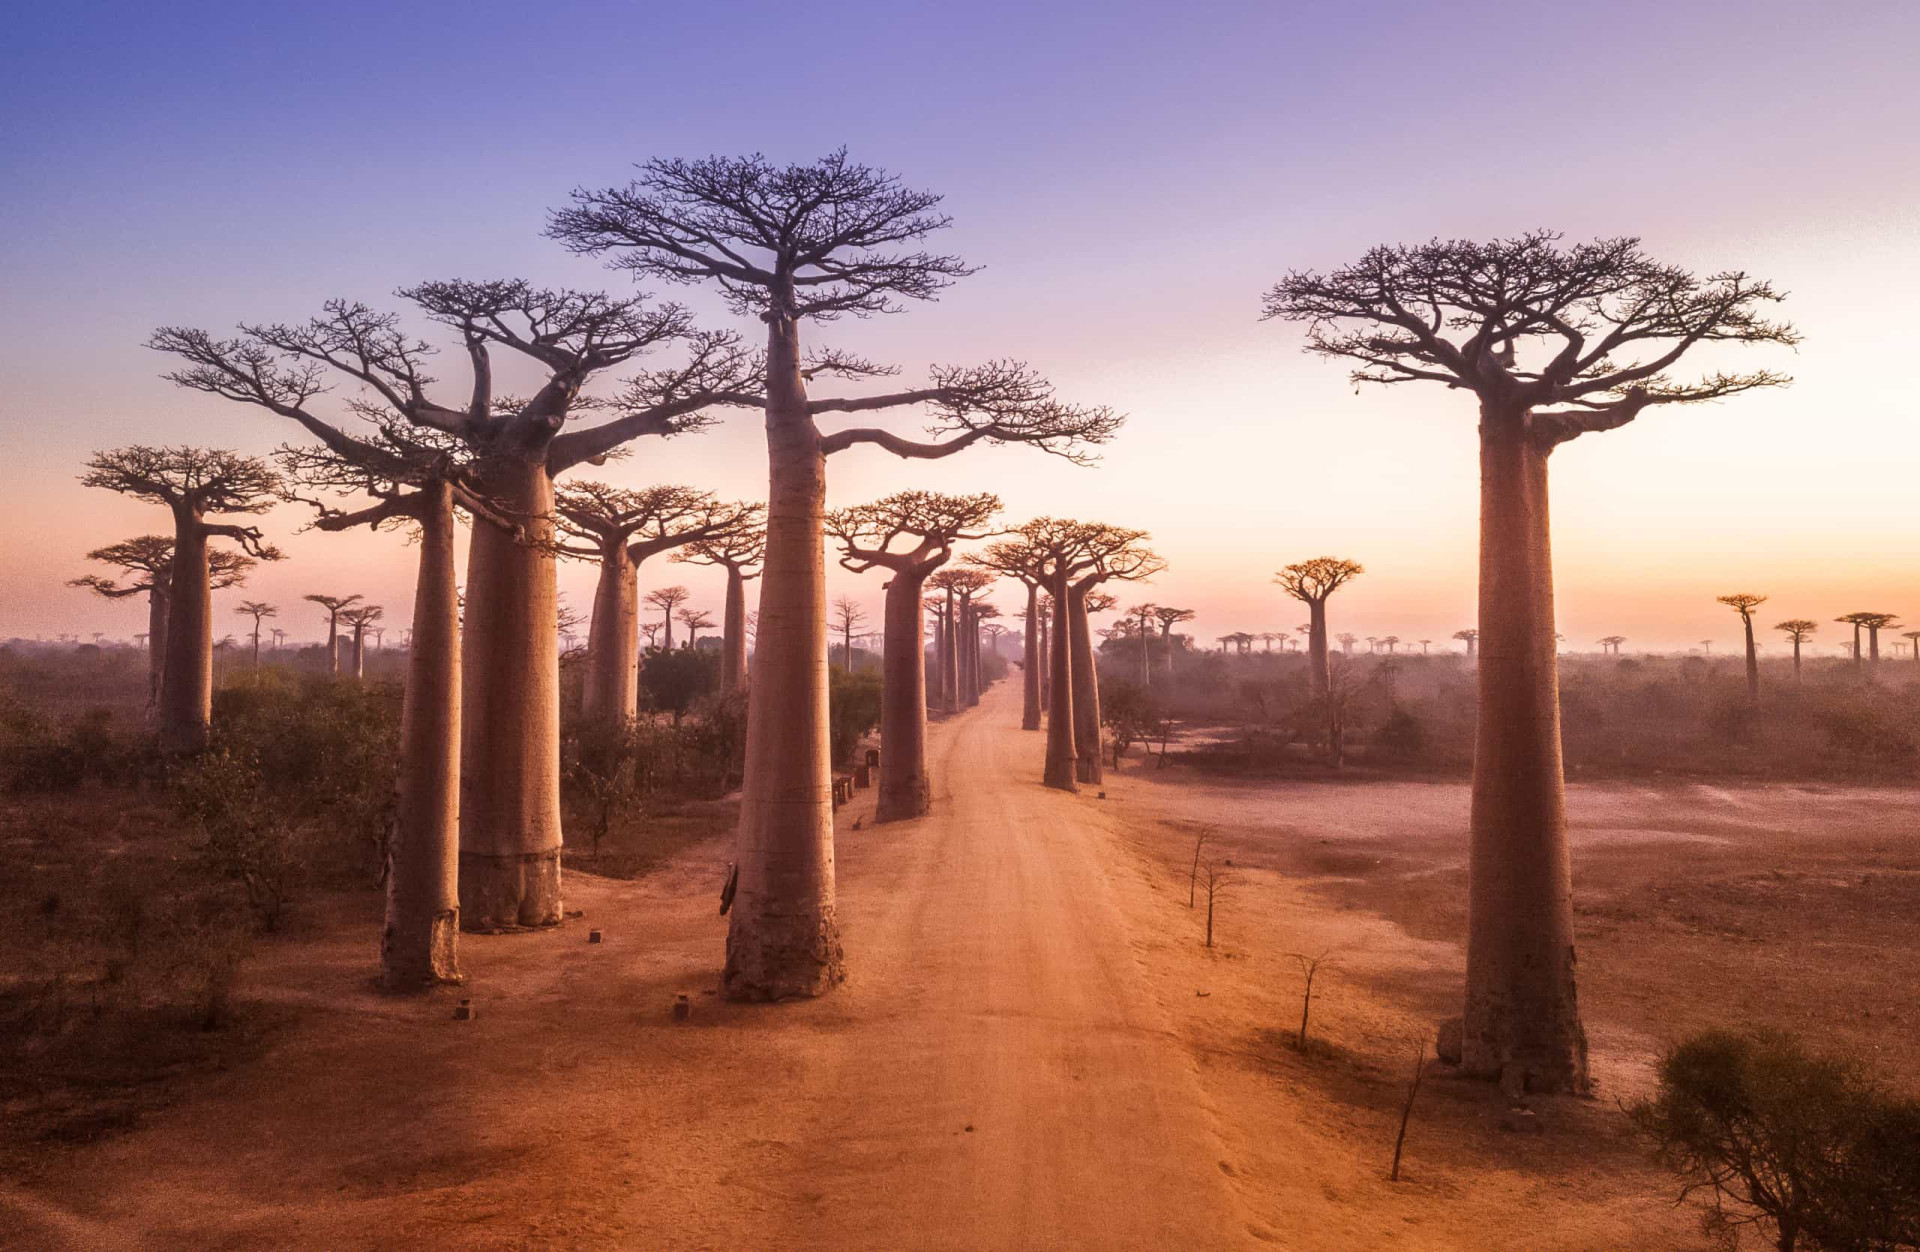 <p>One of the island's most recognized natural wonders, the baobab trees lining the dirt track between Morondava and Belon'i Tsiribihina are a world-famous attraction.</p> <p>See also: <a href="https://www.starsinsider.com/travel/430111/bizarre-trees-with-a-fascinating-history">Bizarre trees with a fascinating history</a></p><p><a href="https://www.msn.com/en-us/community/channel/vid-7xx8mnucu55yw63we9va2gwr7uihbxwc68fxqp25x6tg4ftibpra?cvid=94631541bc0f4f89bfd59158d696ad7e">Follow us and access great exclusive content every day</a></p>